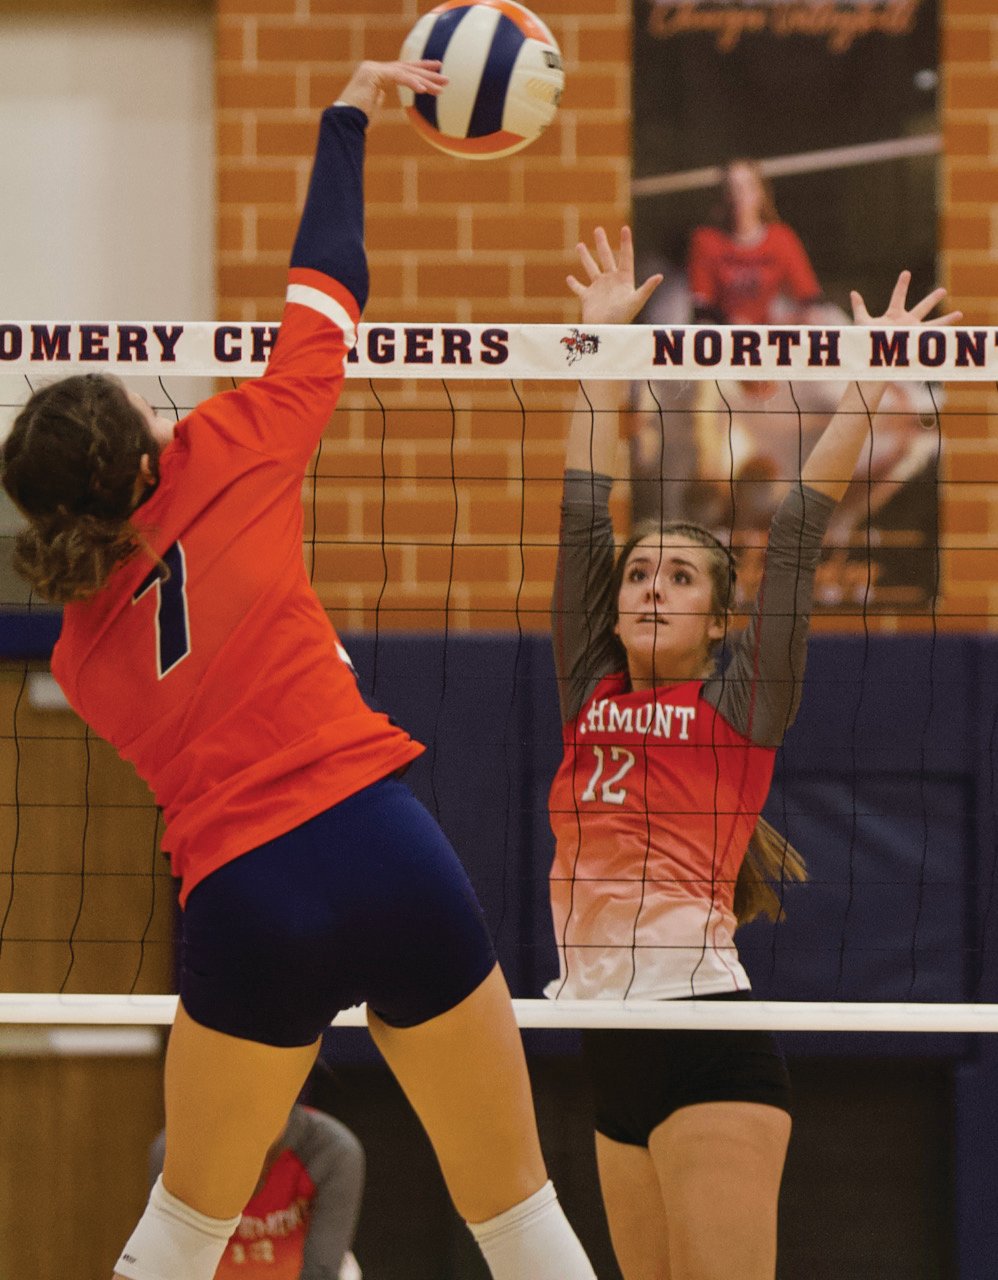 North Montgomery senior Ashlynn Anderson spikes the ball upon the Southmont defense.